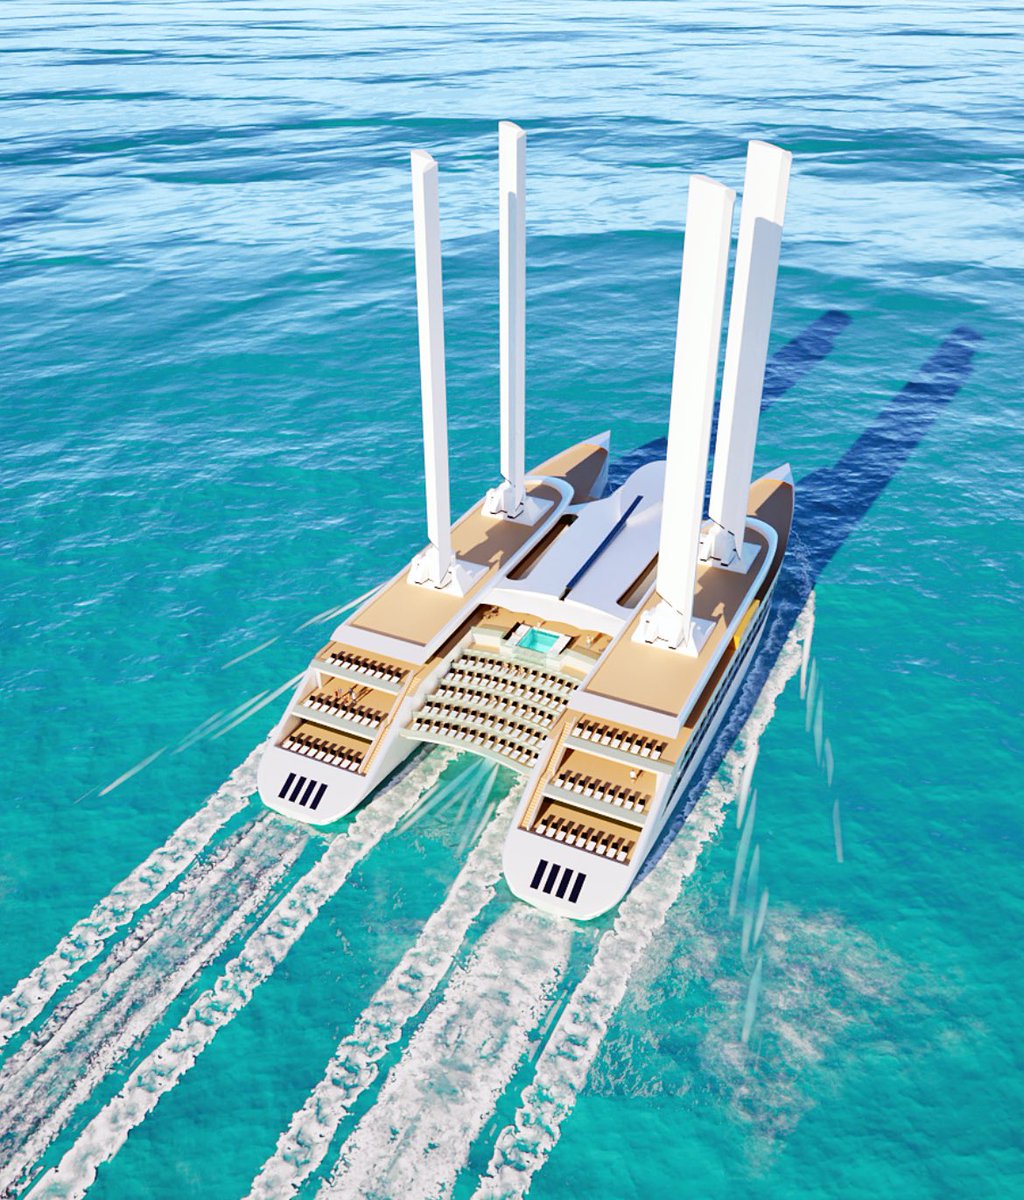 Cruise ship of the future? This catamaran powered by four 50m-high foldable sails has been unveiled by YSA Design and could carry 200 guests plus 155 crew. Engines running on green bio-methanol would sustain hotel operations and help the main propulsion on low-wind days.